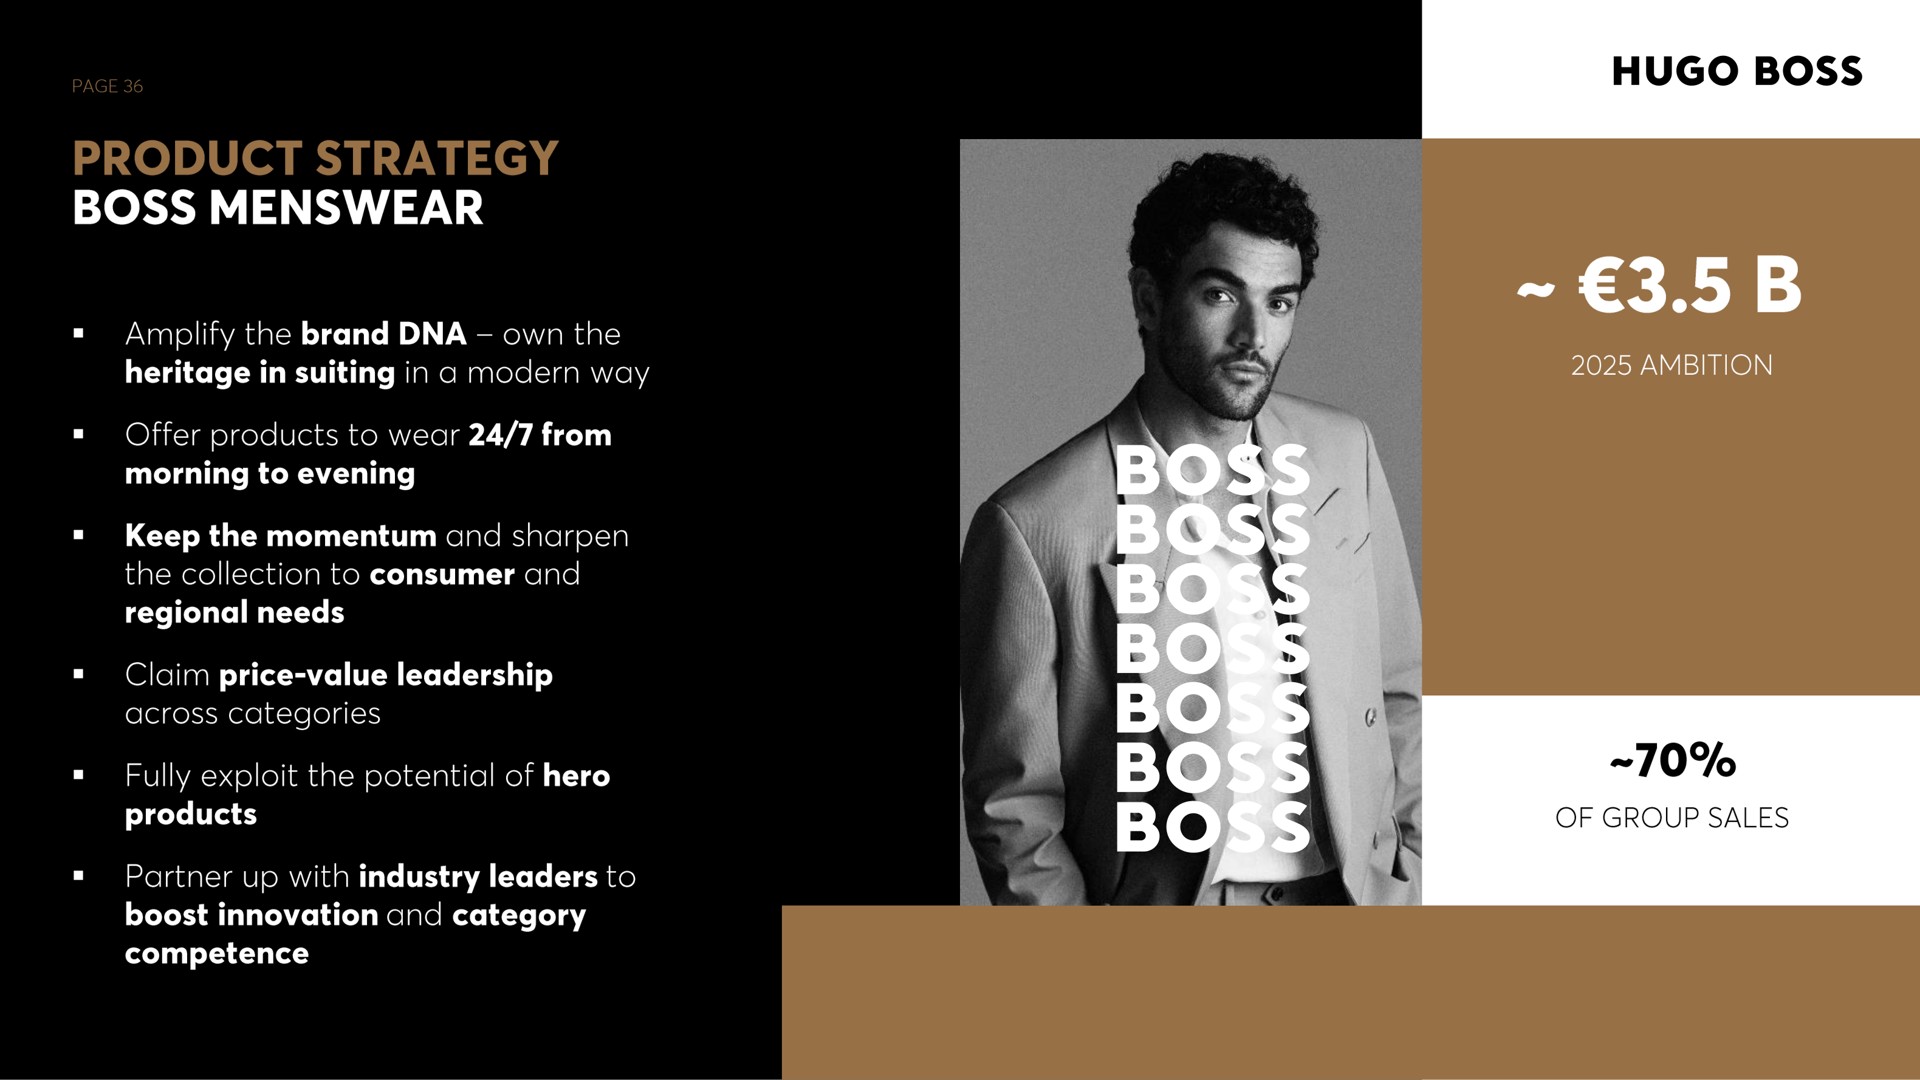 aces product strategy boss amplify the brand own the heritage in suiting in a modern way offer products to wear from morning to evening boss keep the momentum and sharpen the collection to consumer and regional needs claim price value leadership partner up with industry leaders to boost innovation and category fully exploit the potential of hero cats of group sales | Hugo Boss